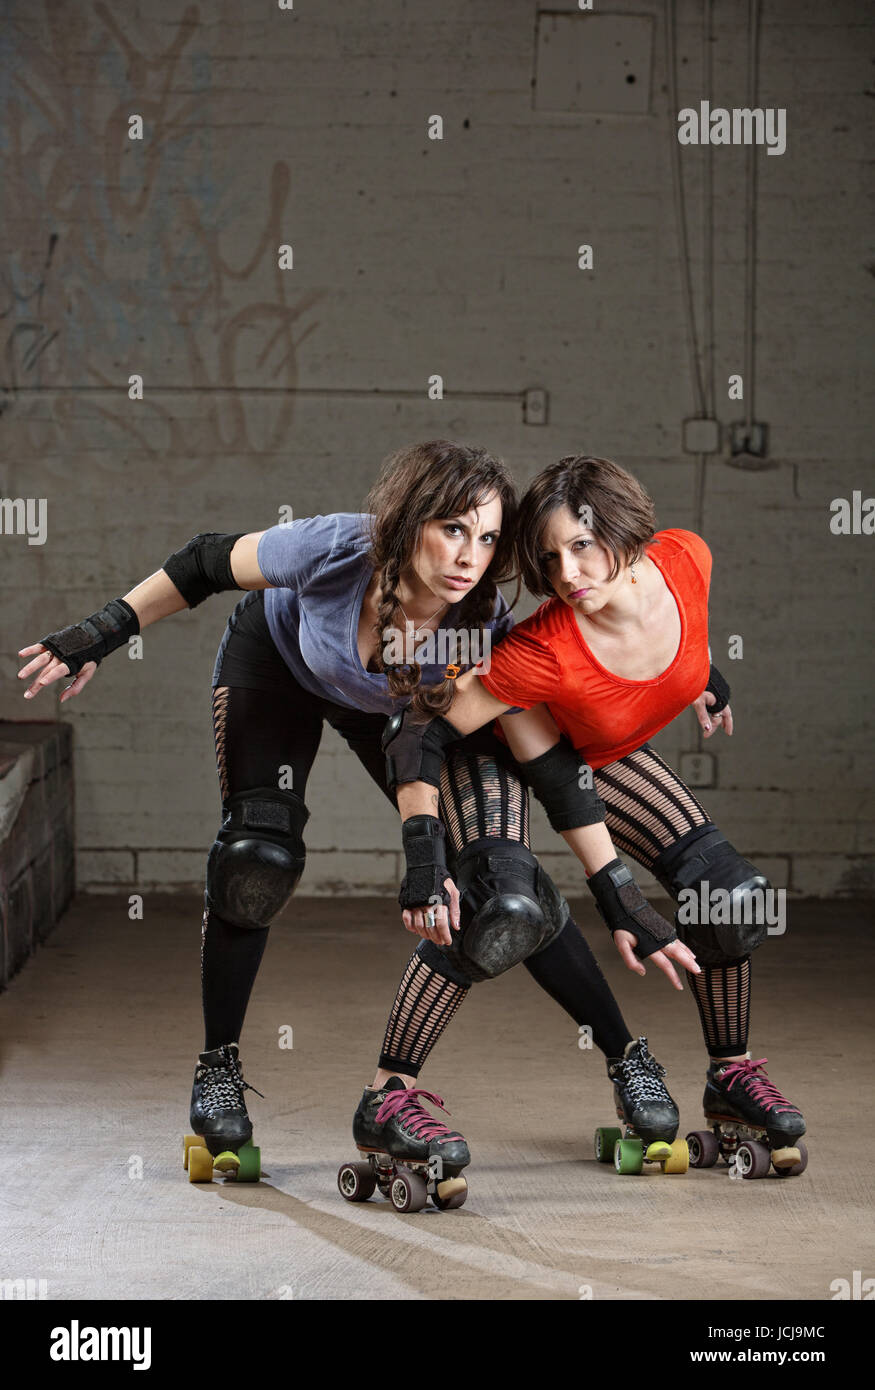 Pair of beautiful female roller derby skaters in action pose Stock Photo -  Alamy